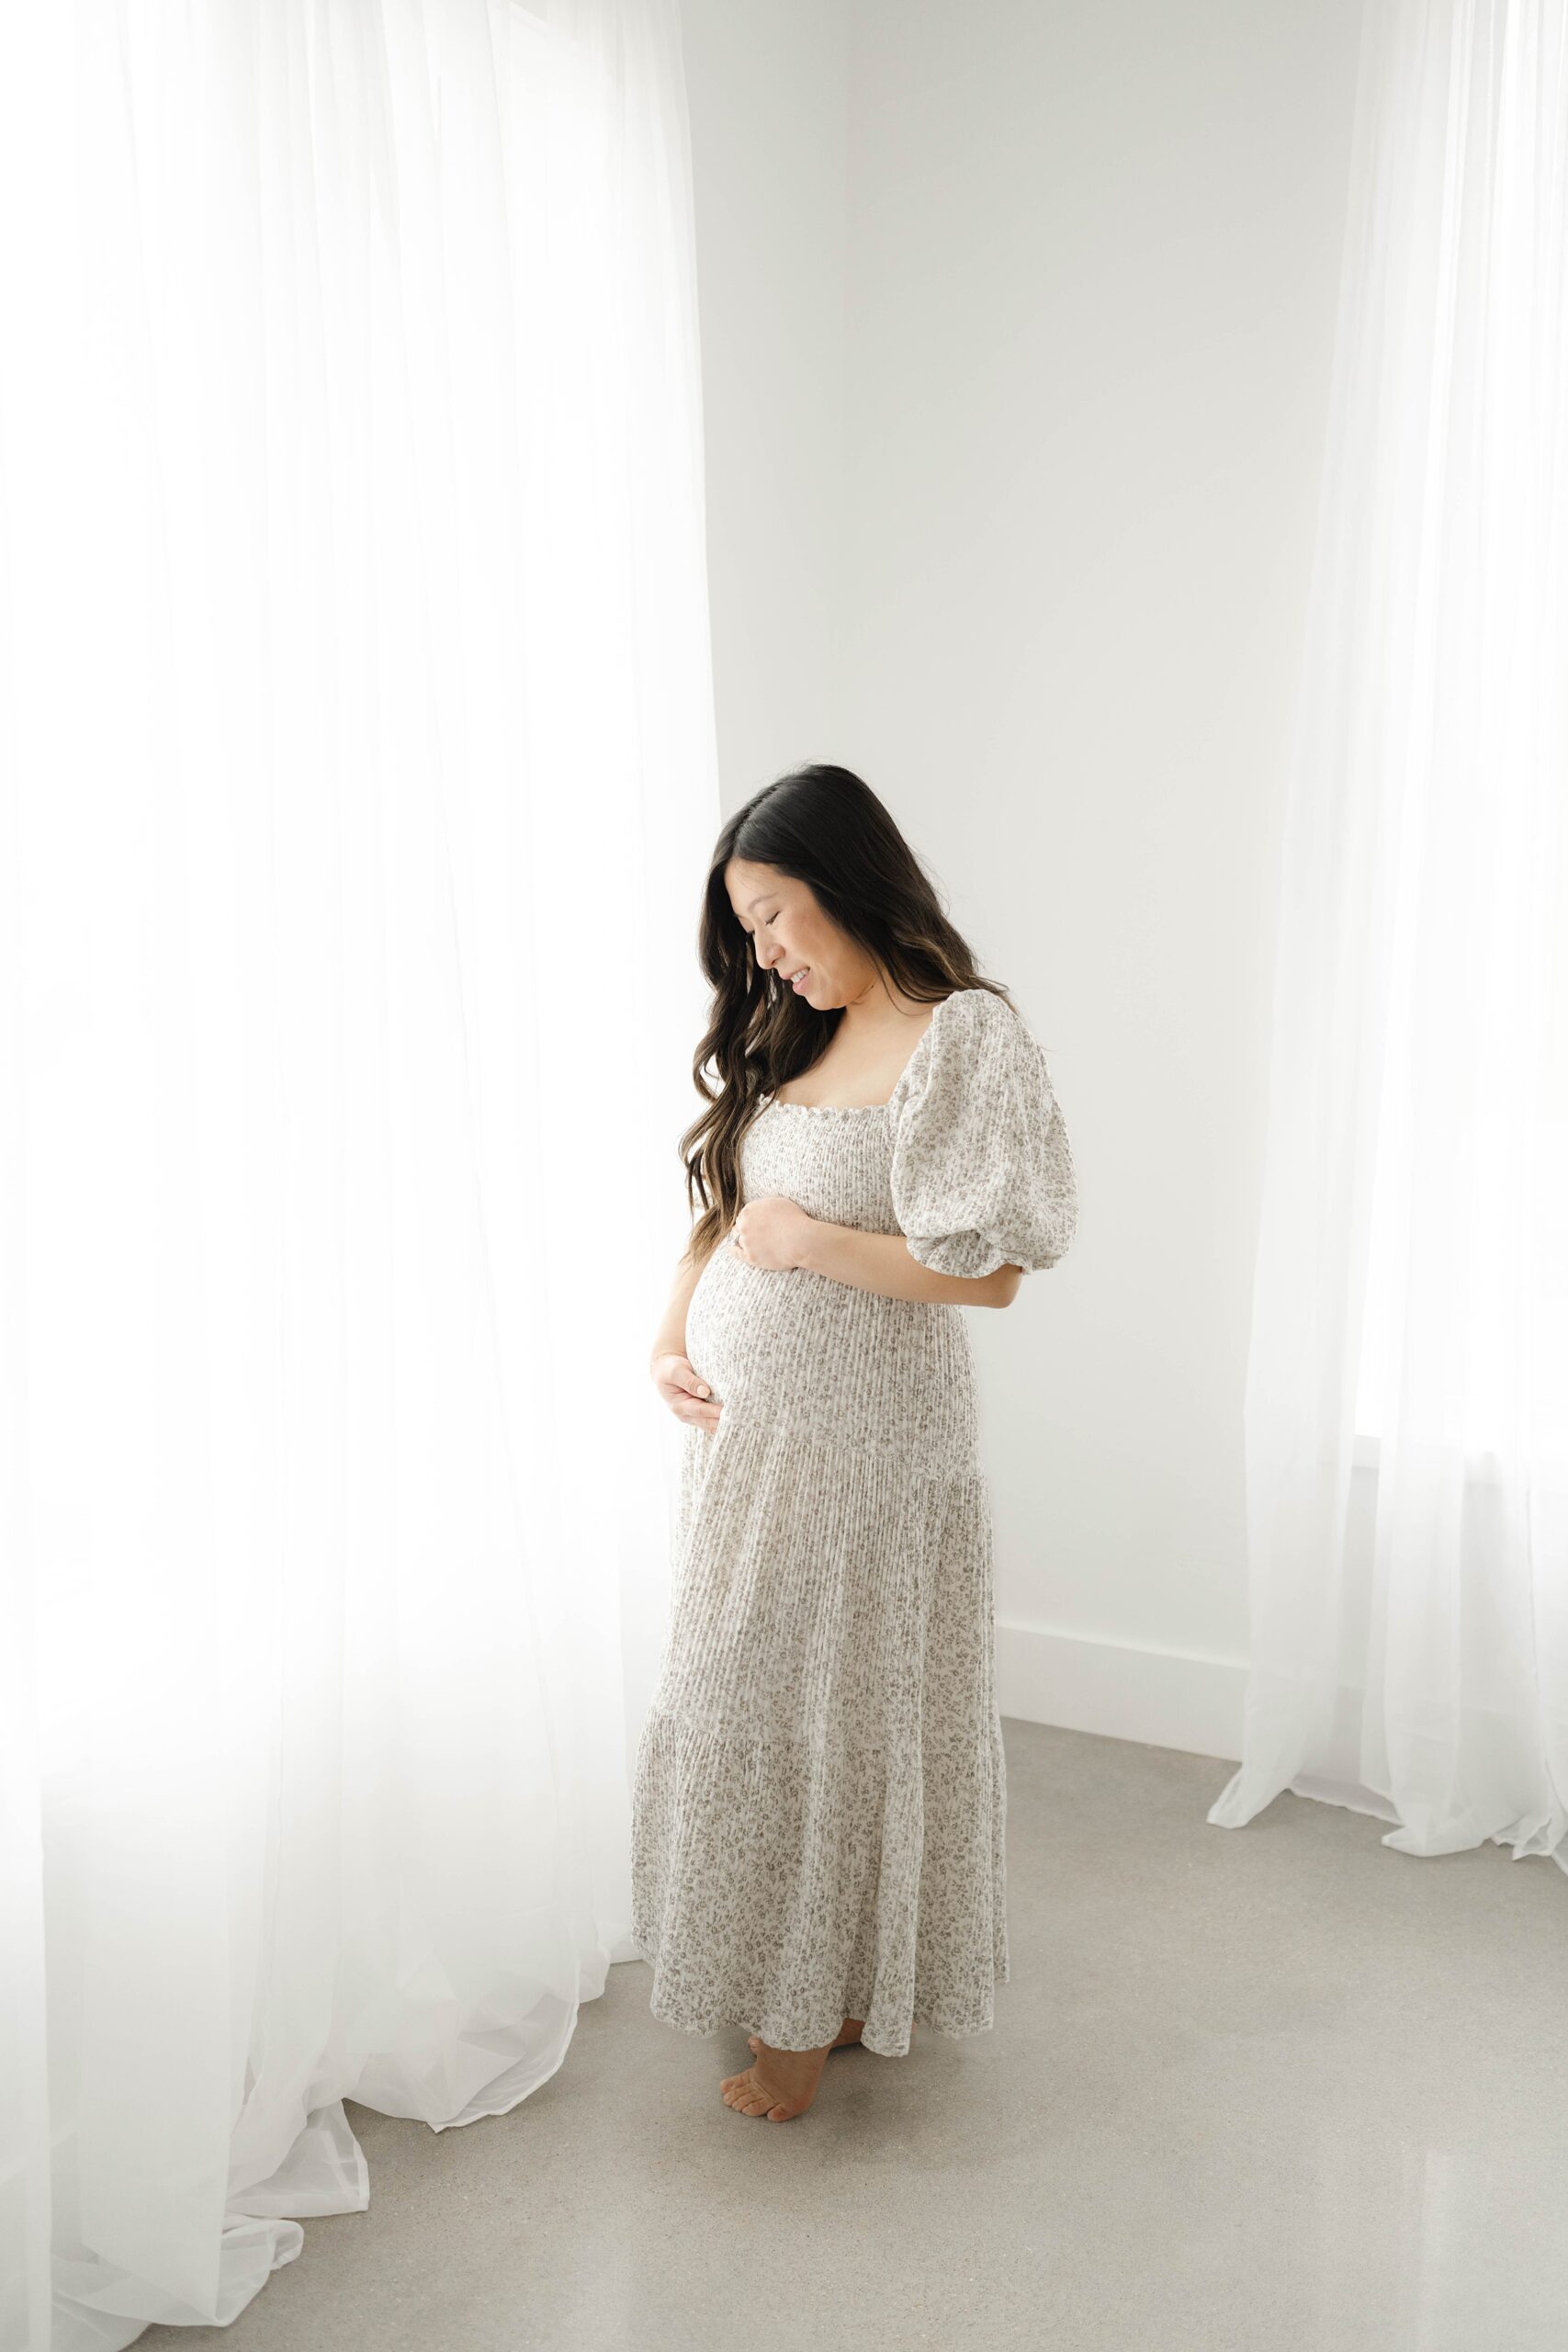 A mother in a floral dress stands in a window of a studio smiling down at the bump in her hands thanks to ou obgyn